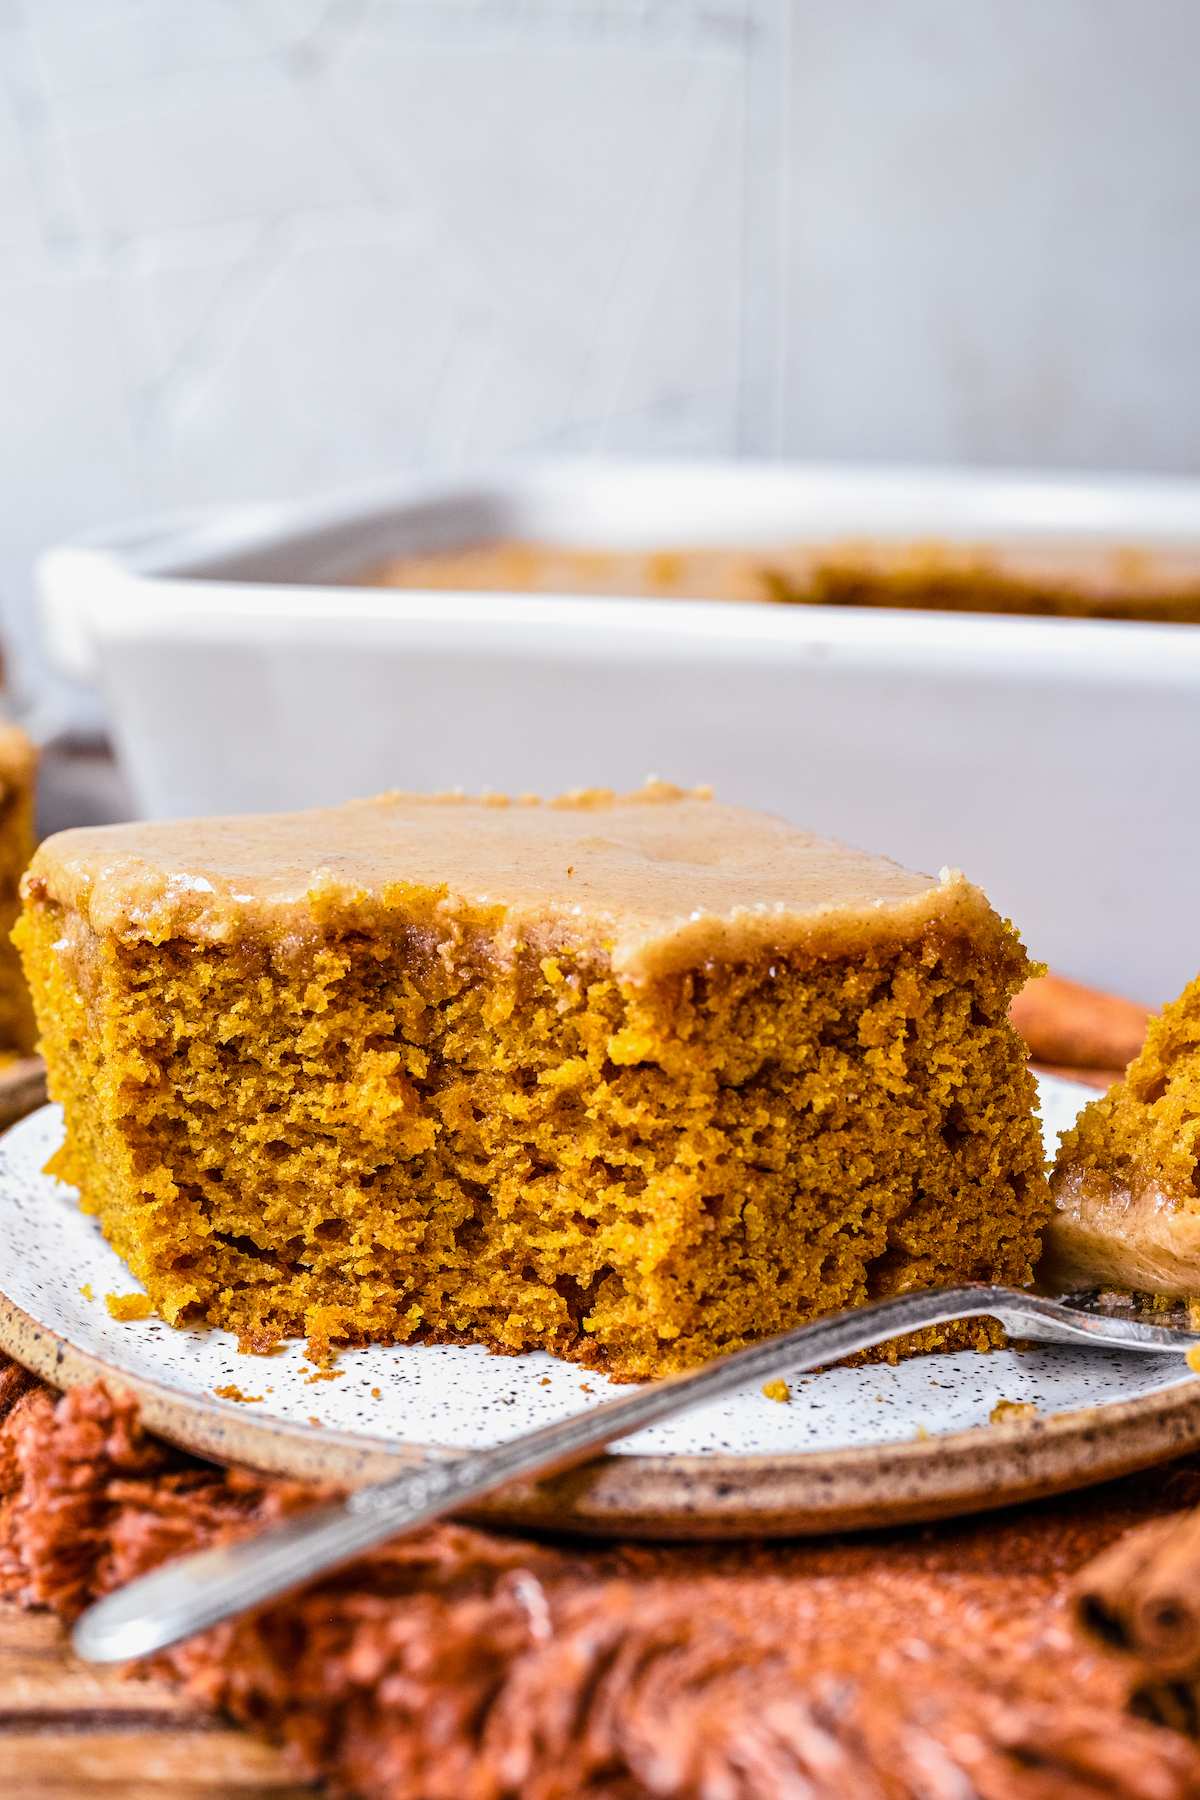 A square of pumpkin cake with a bite-sized piece resting on a fork.